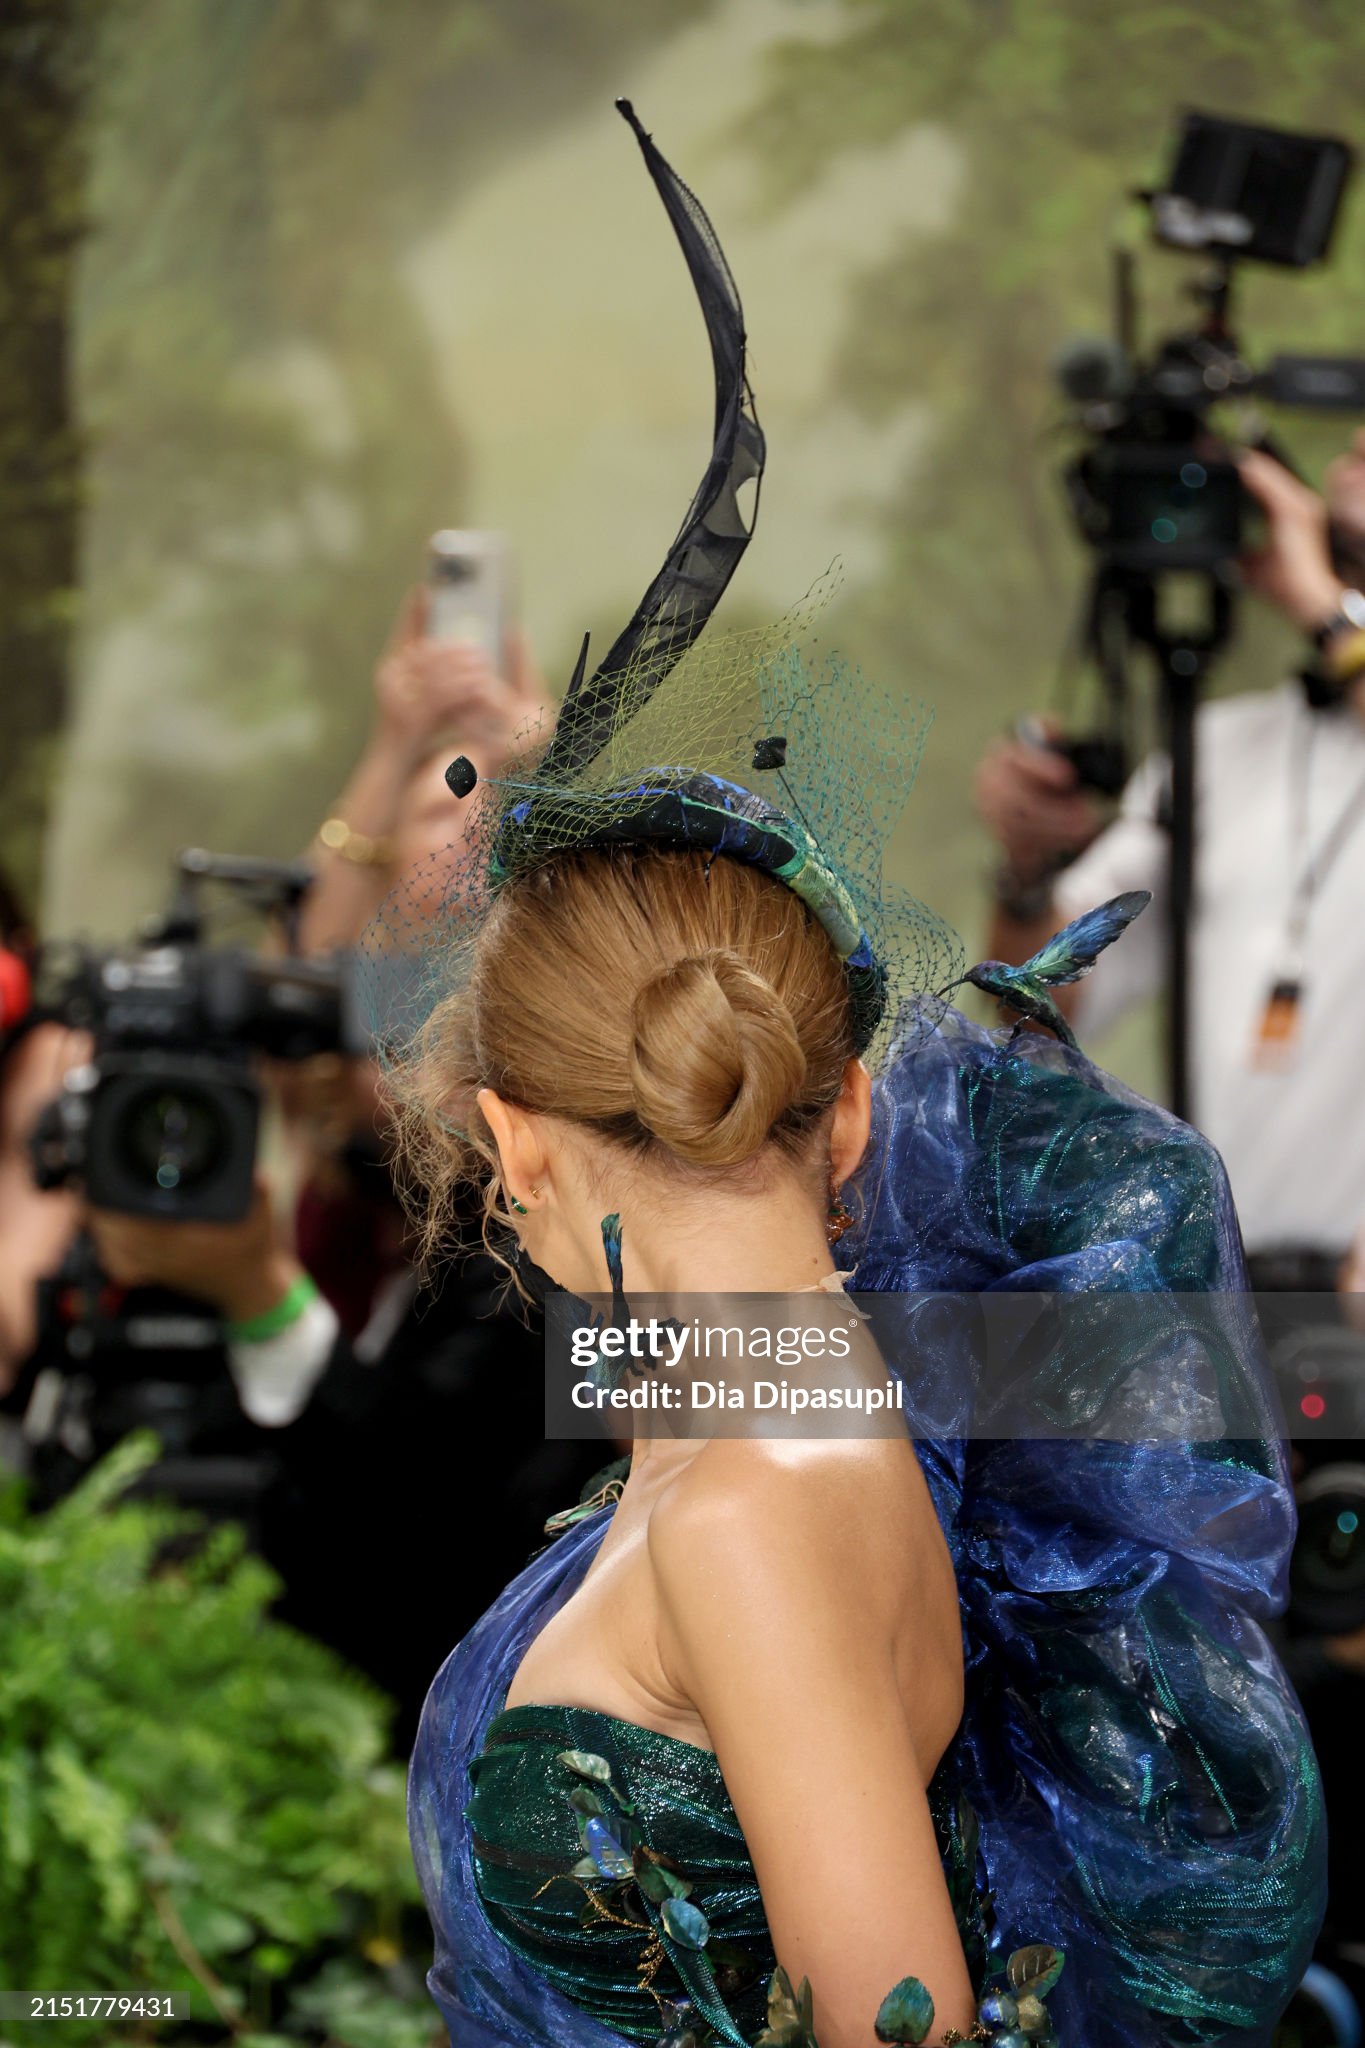 gettyimages-2151779431-2048x2048.jpg